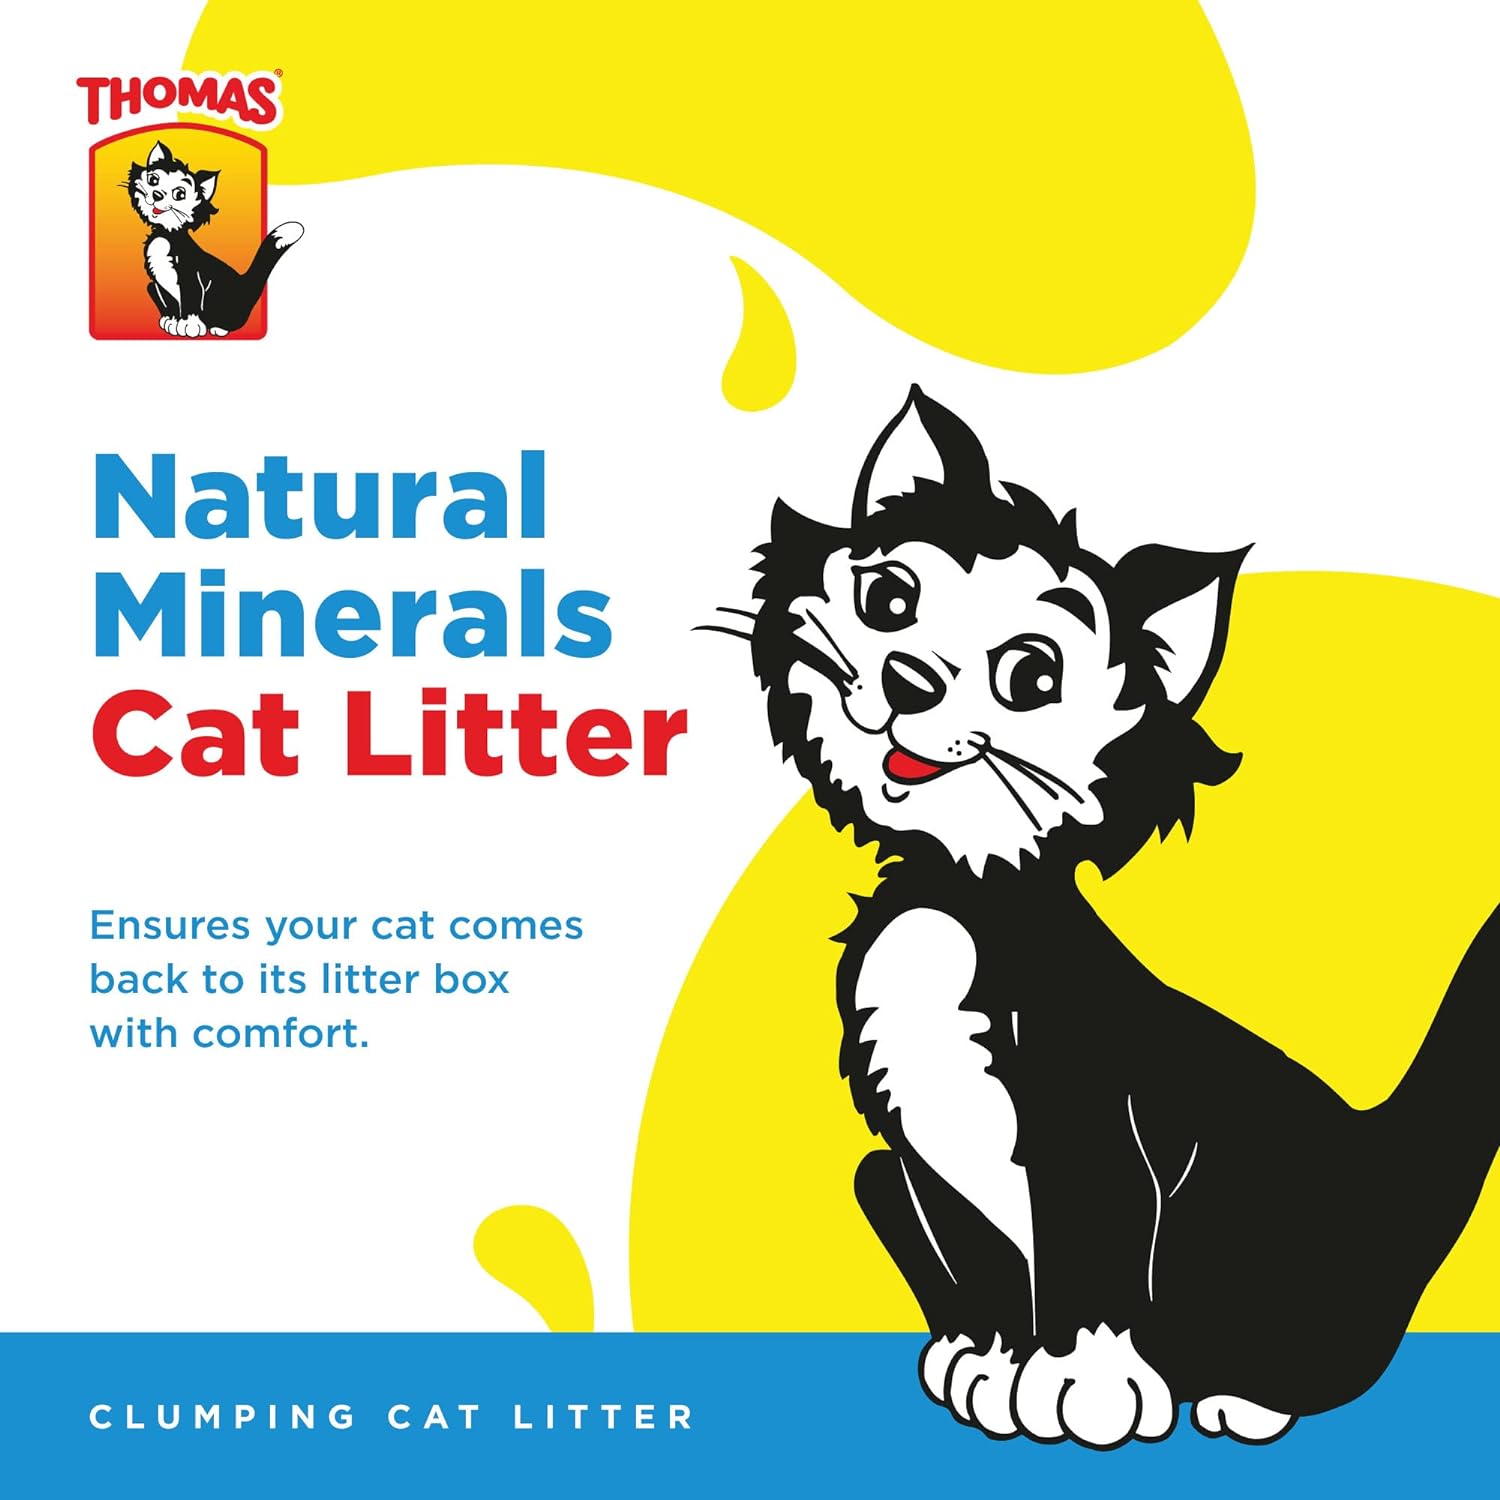 Thomas Cat Litter, Natural Minerals Litter Sand, it's Non-Clumping and Highly Absorbent Nature Ensures Your Cat to Come Back to its Cat Litter Box with Comfort, Bag of 16L